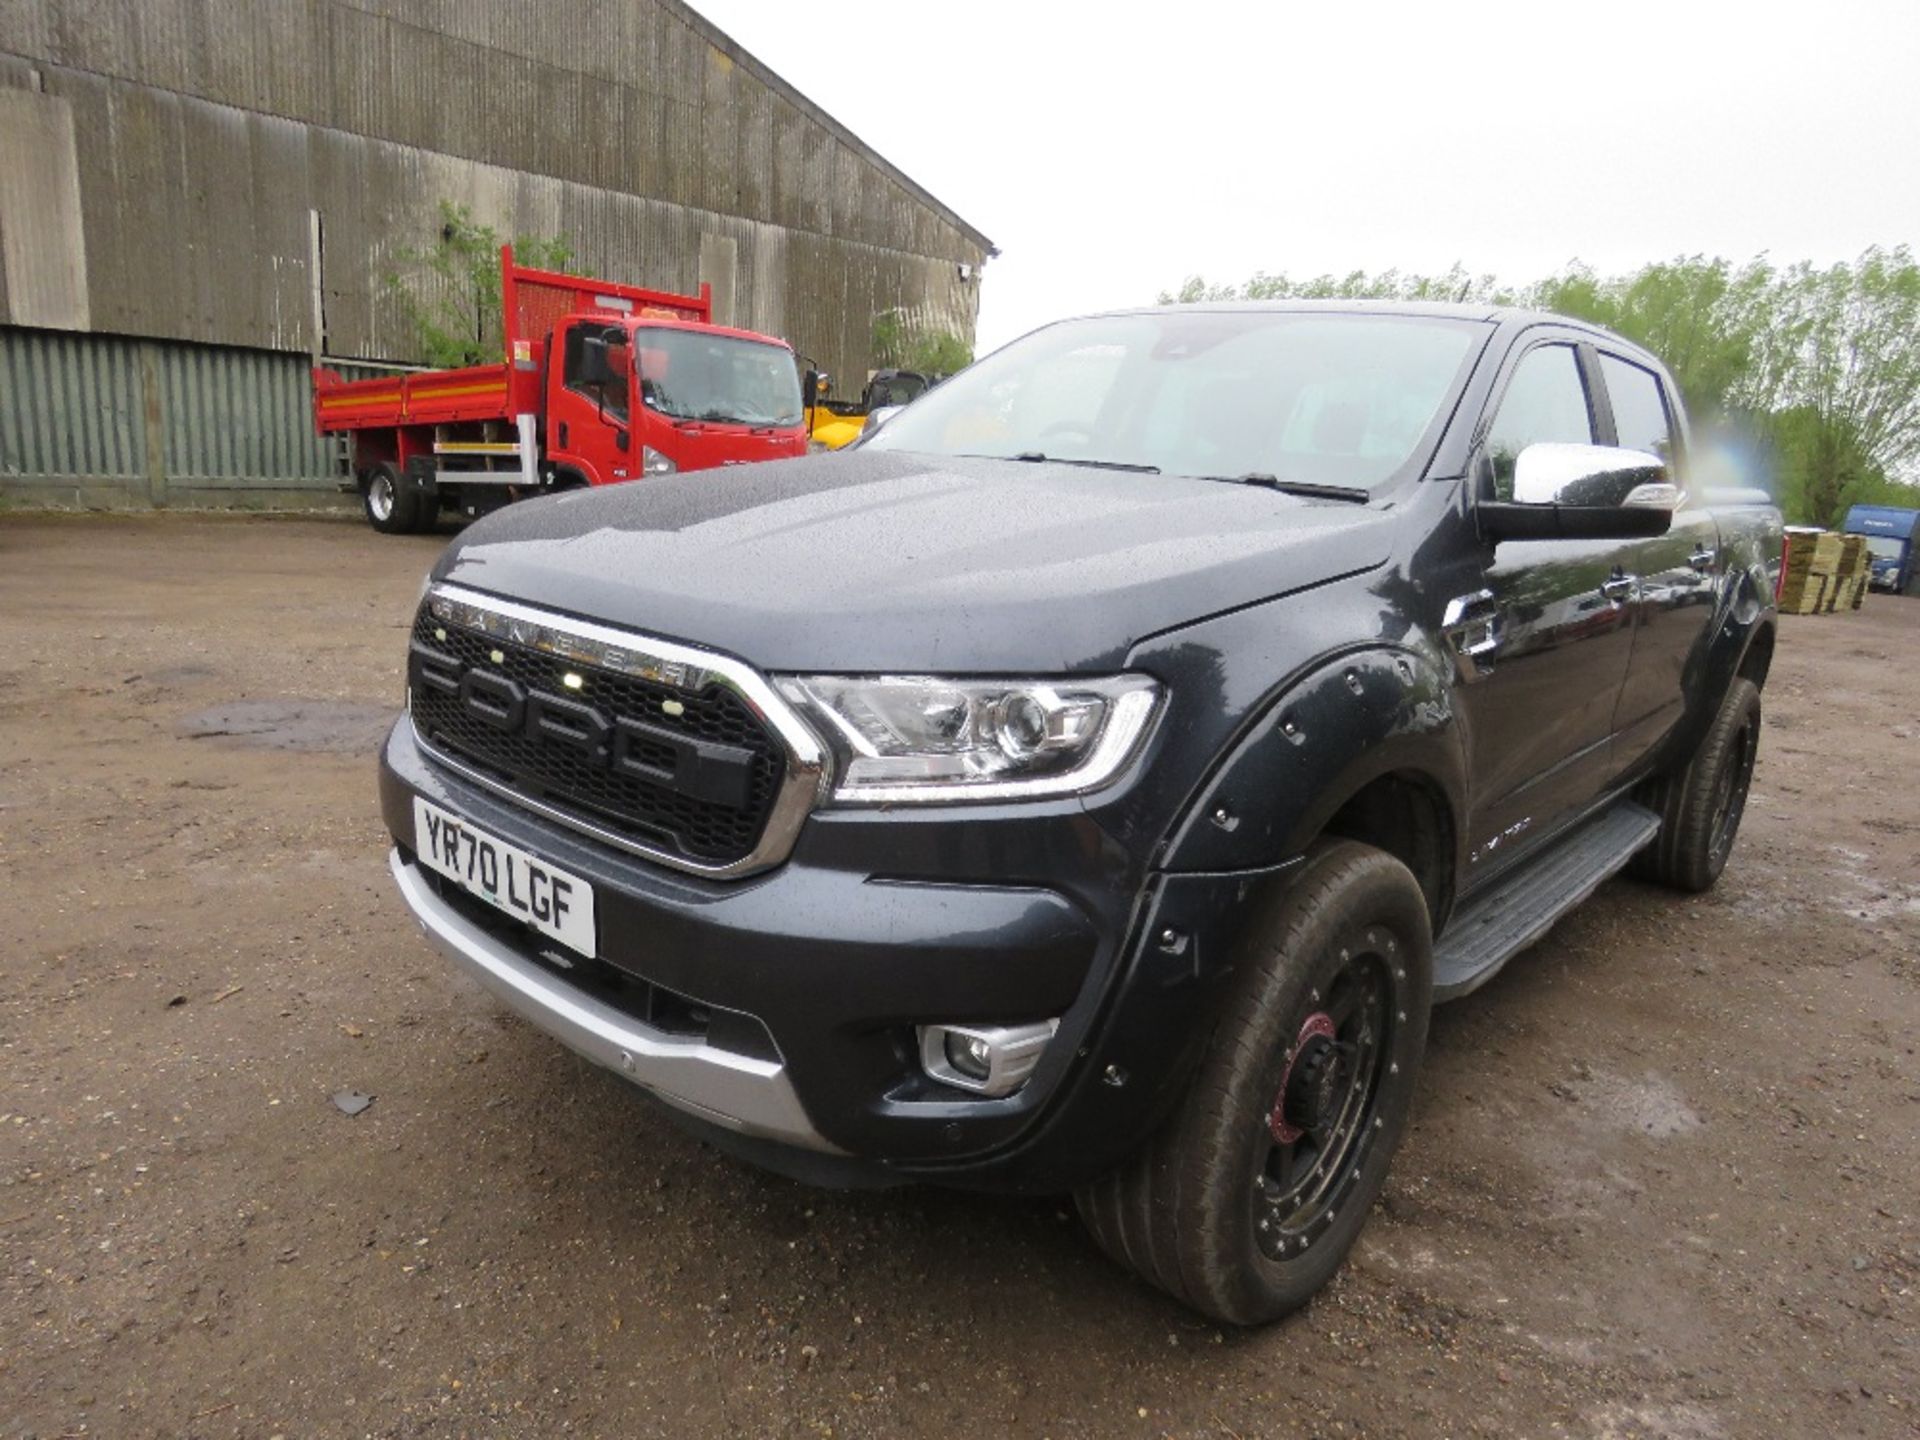 FORD RANGER LIMITED EDITION DOUBLE CAB PICKUP, AUTOMATIC, REG:YR70 LGF. 110,287 REC MILES. 2 LITRE - Image 8 of 15